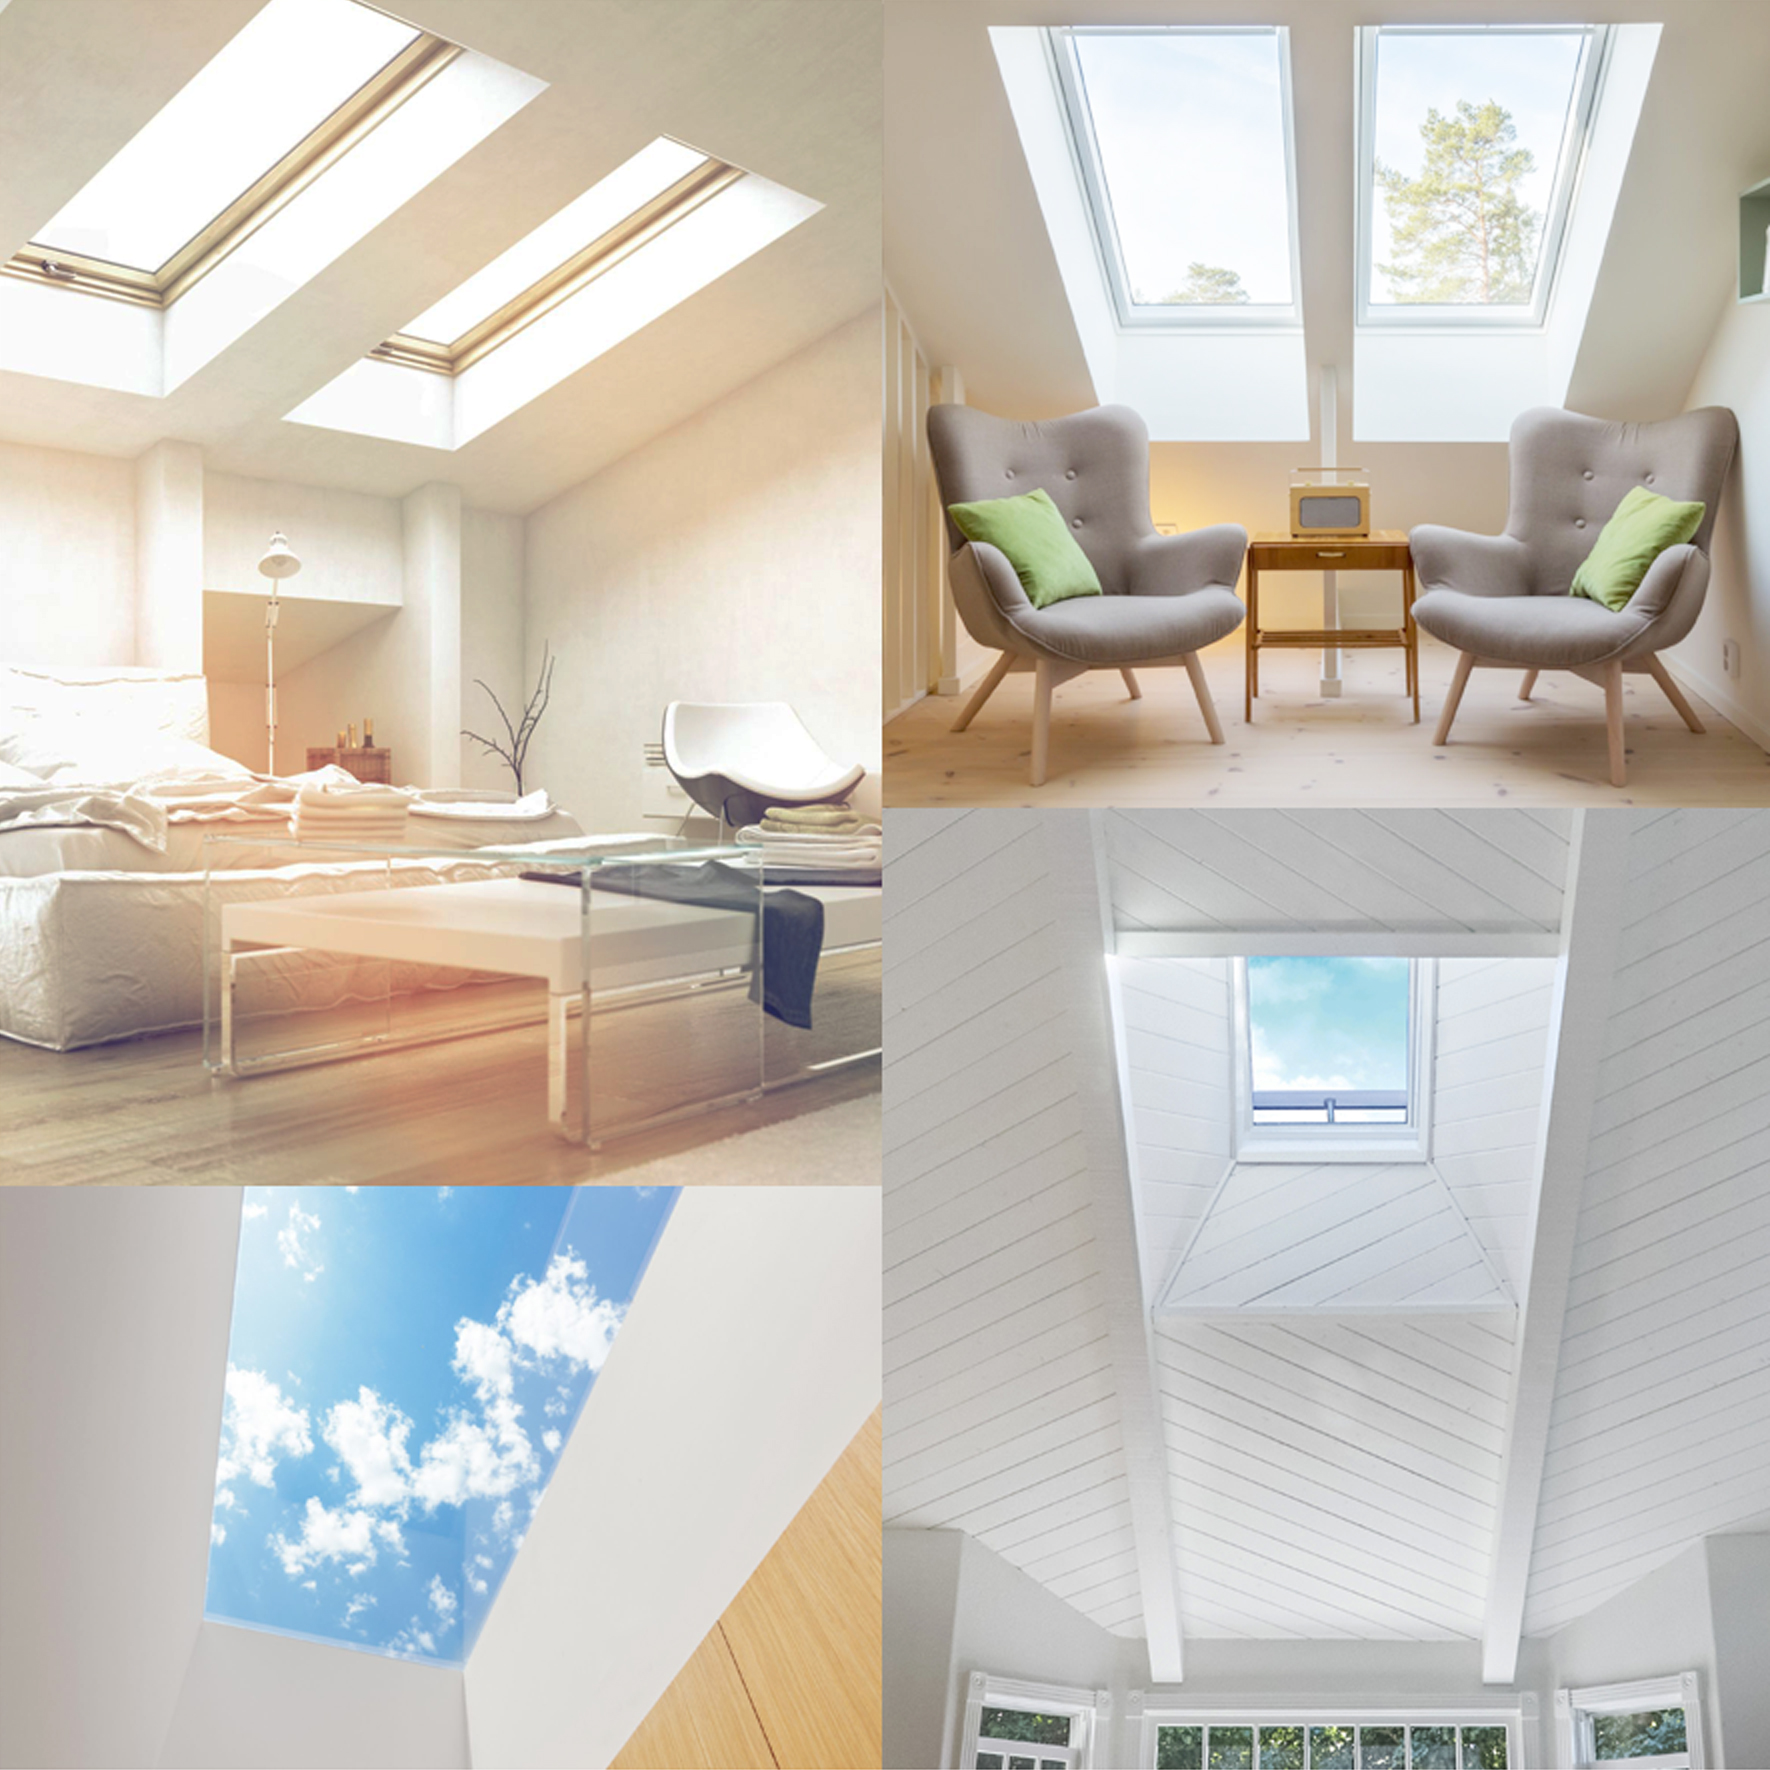 Pictures of Solatube skylights in various living spaces.